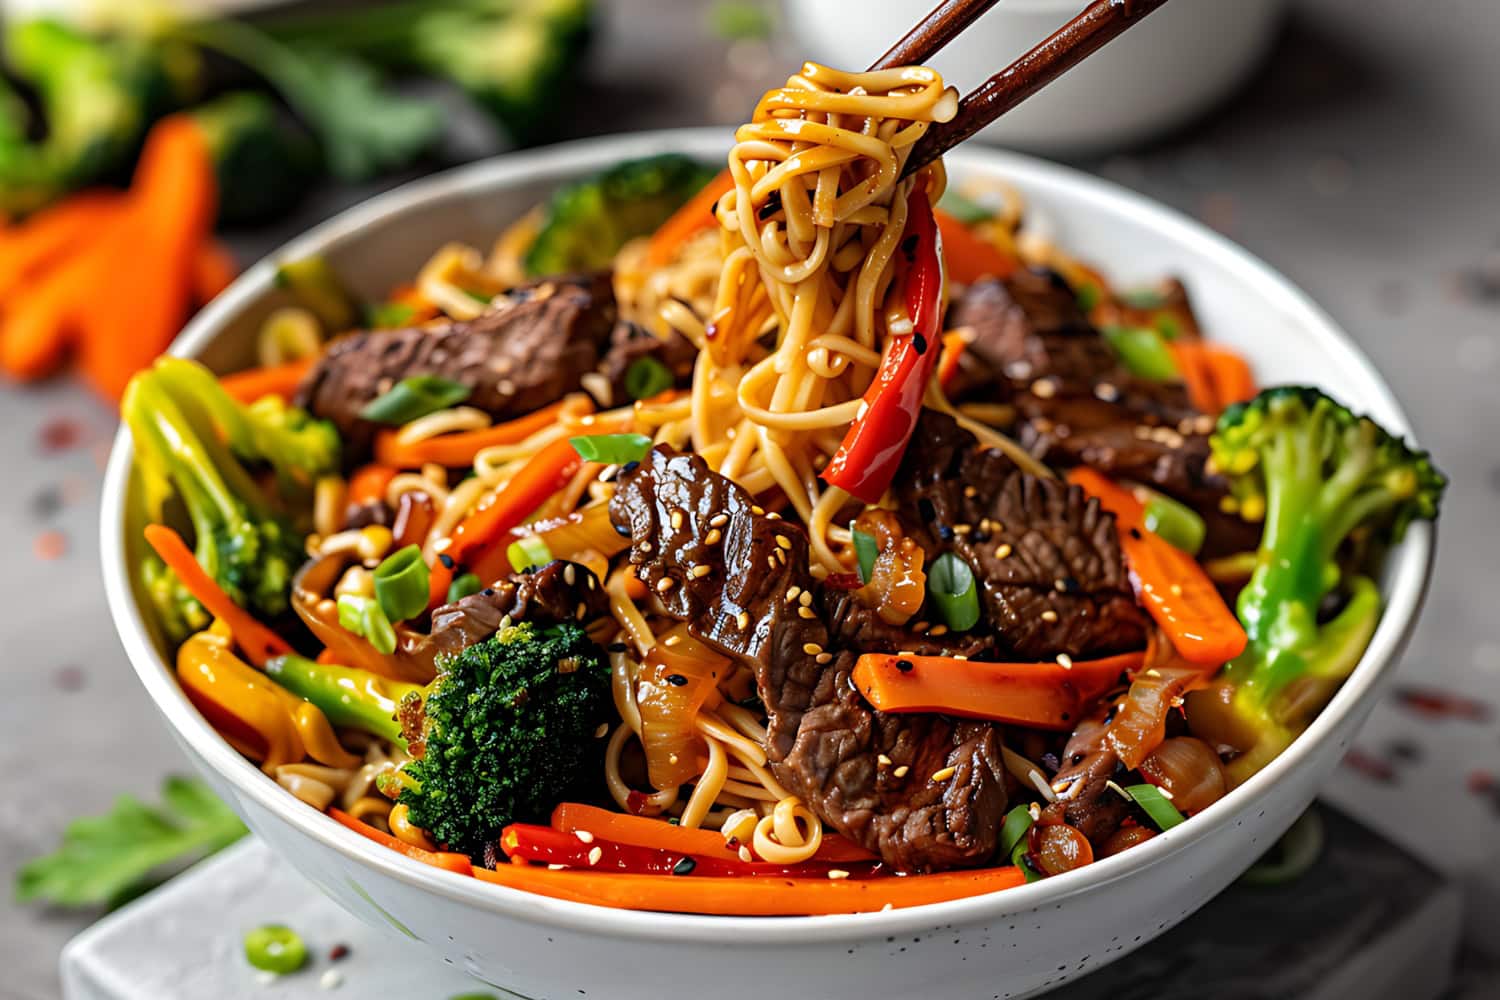 Serving of beef teriyaki noodles served in a white bowl with chopsticks lifting the noodles.